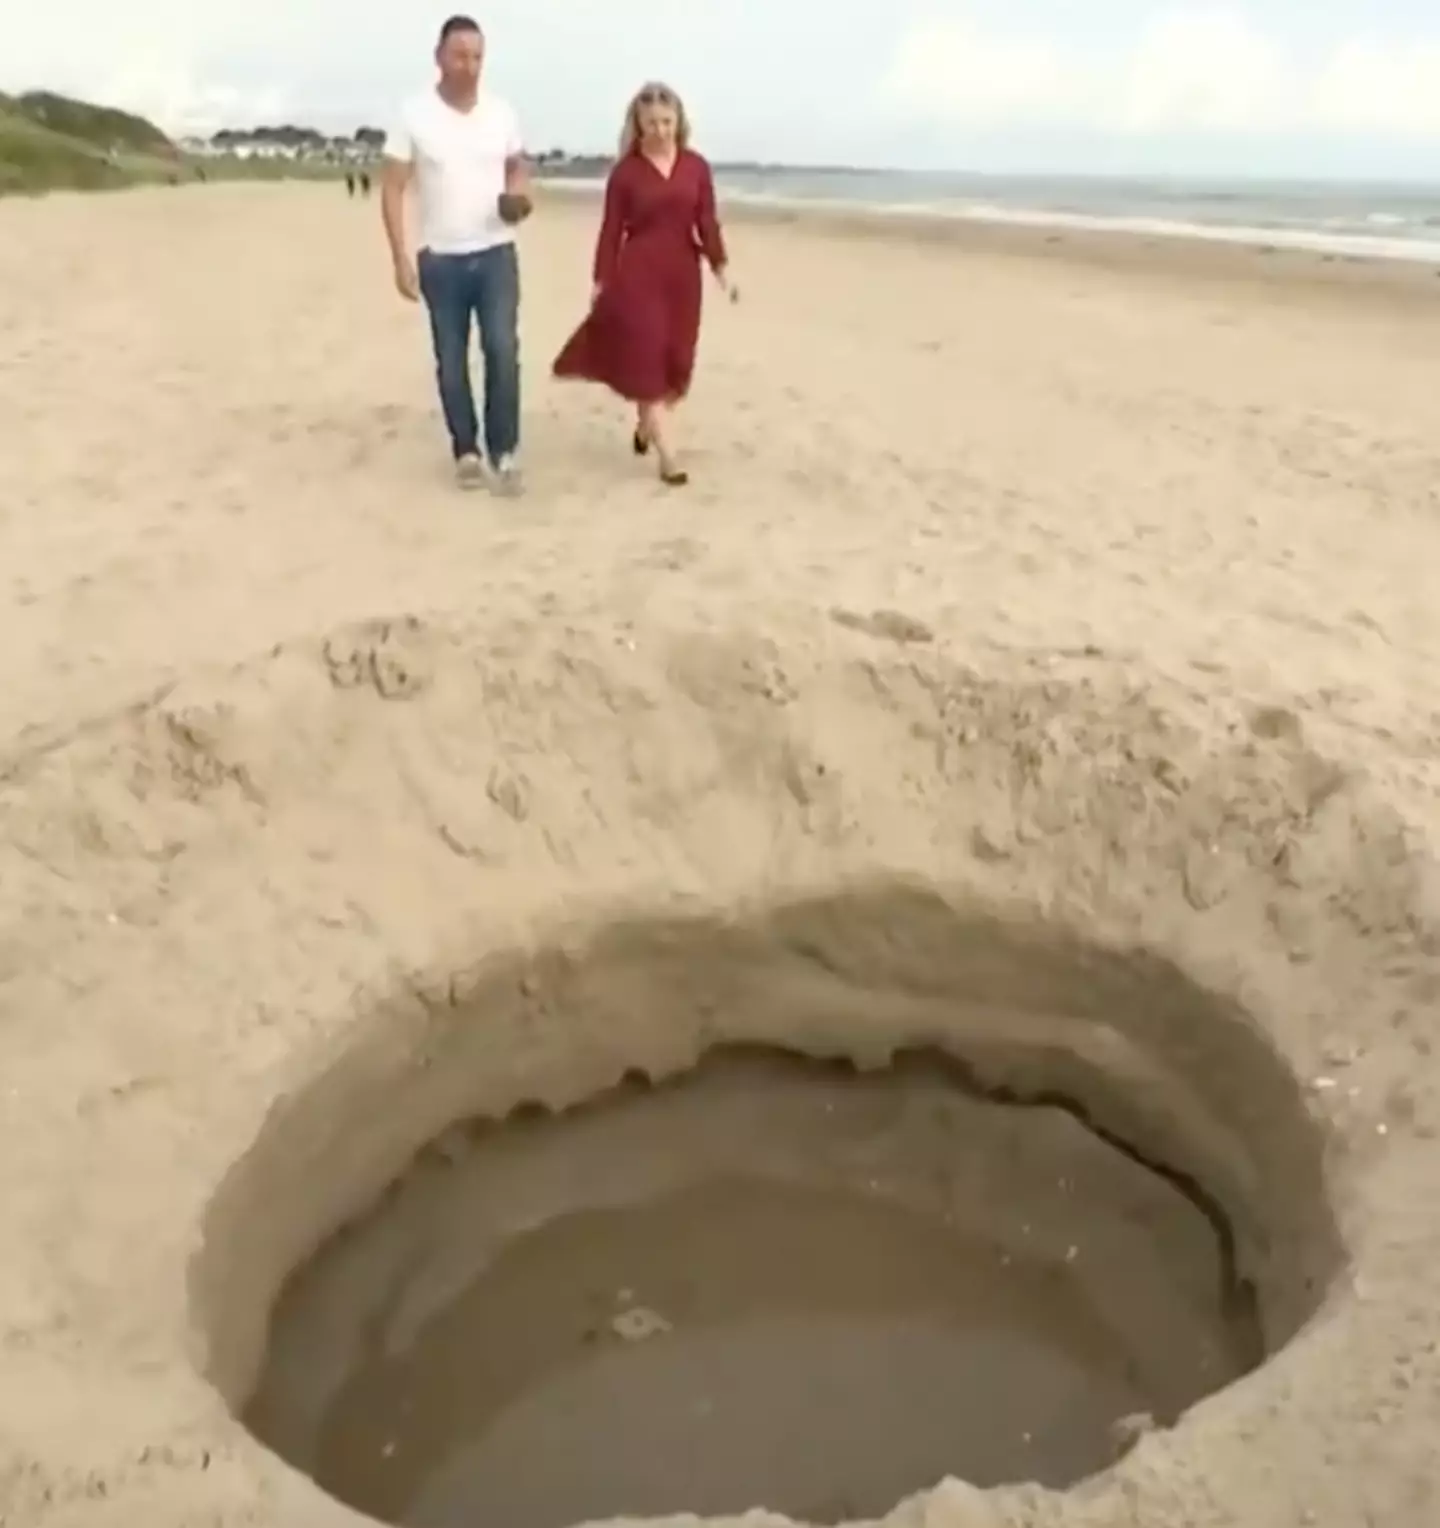 Local residents believed the hole was the 'aftermath of a cosmic event'.